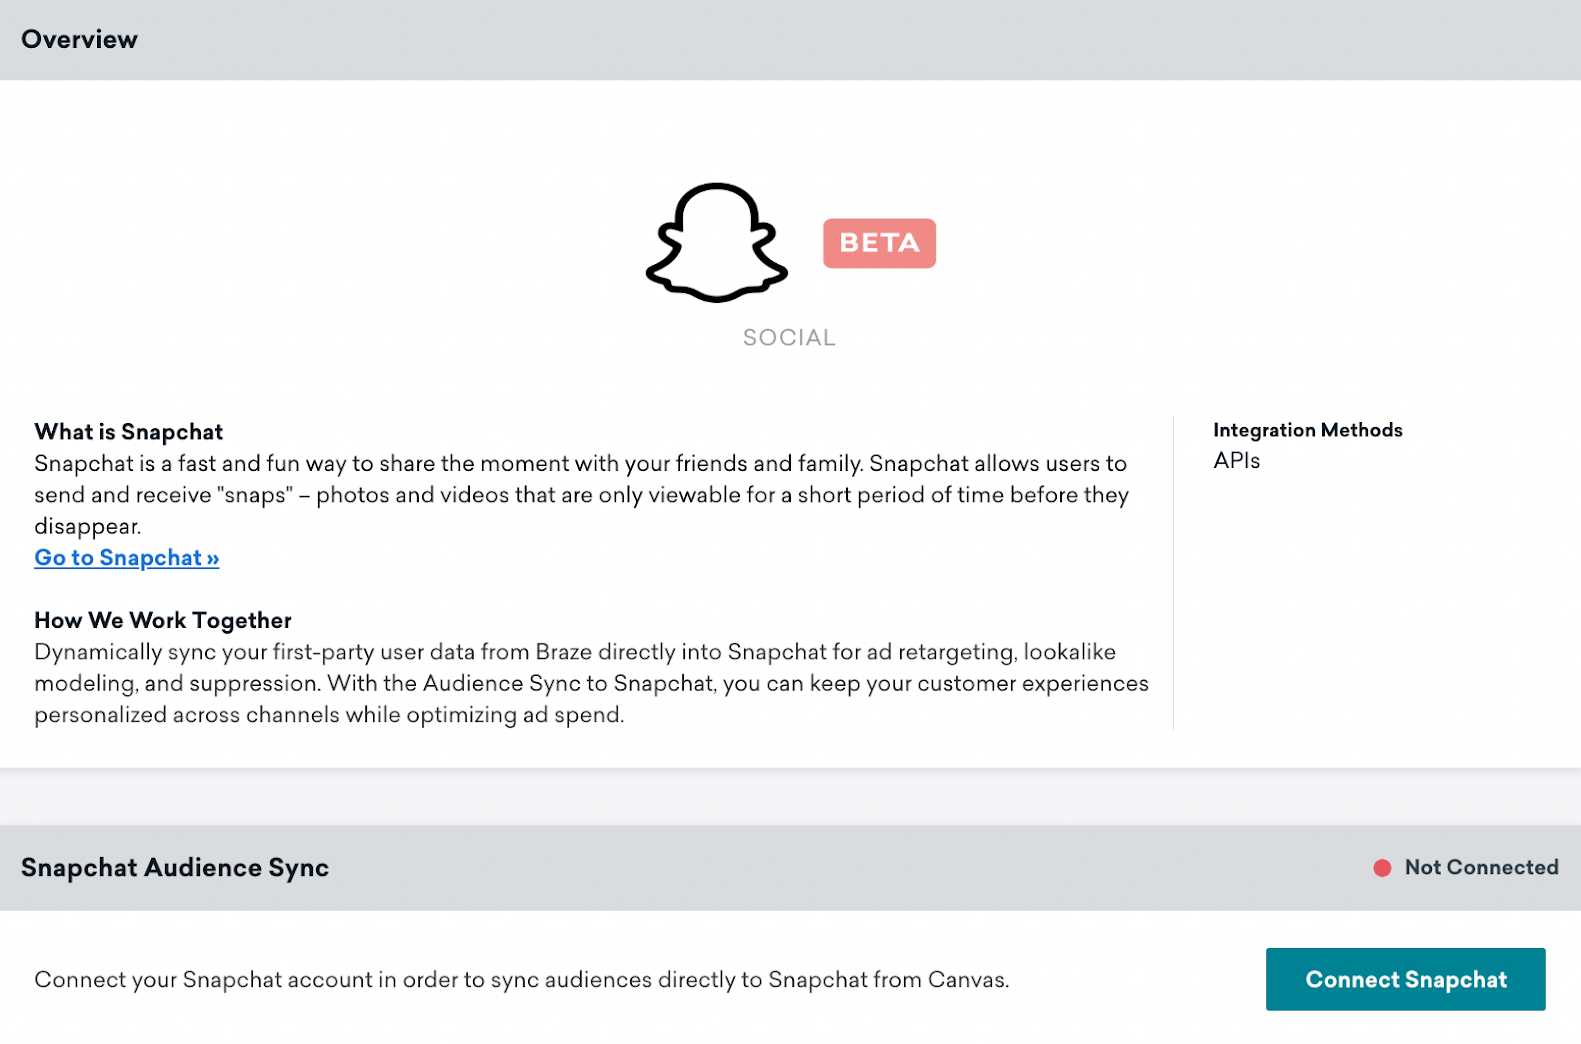 Snapchat technology page in Braze that includes an Overview module and Snapchat Audience Sync module with the Connected Snapchat button.